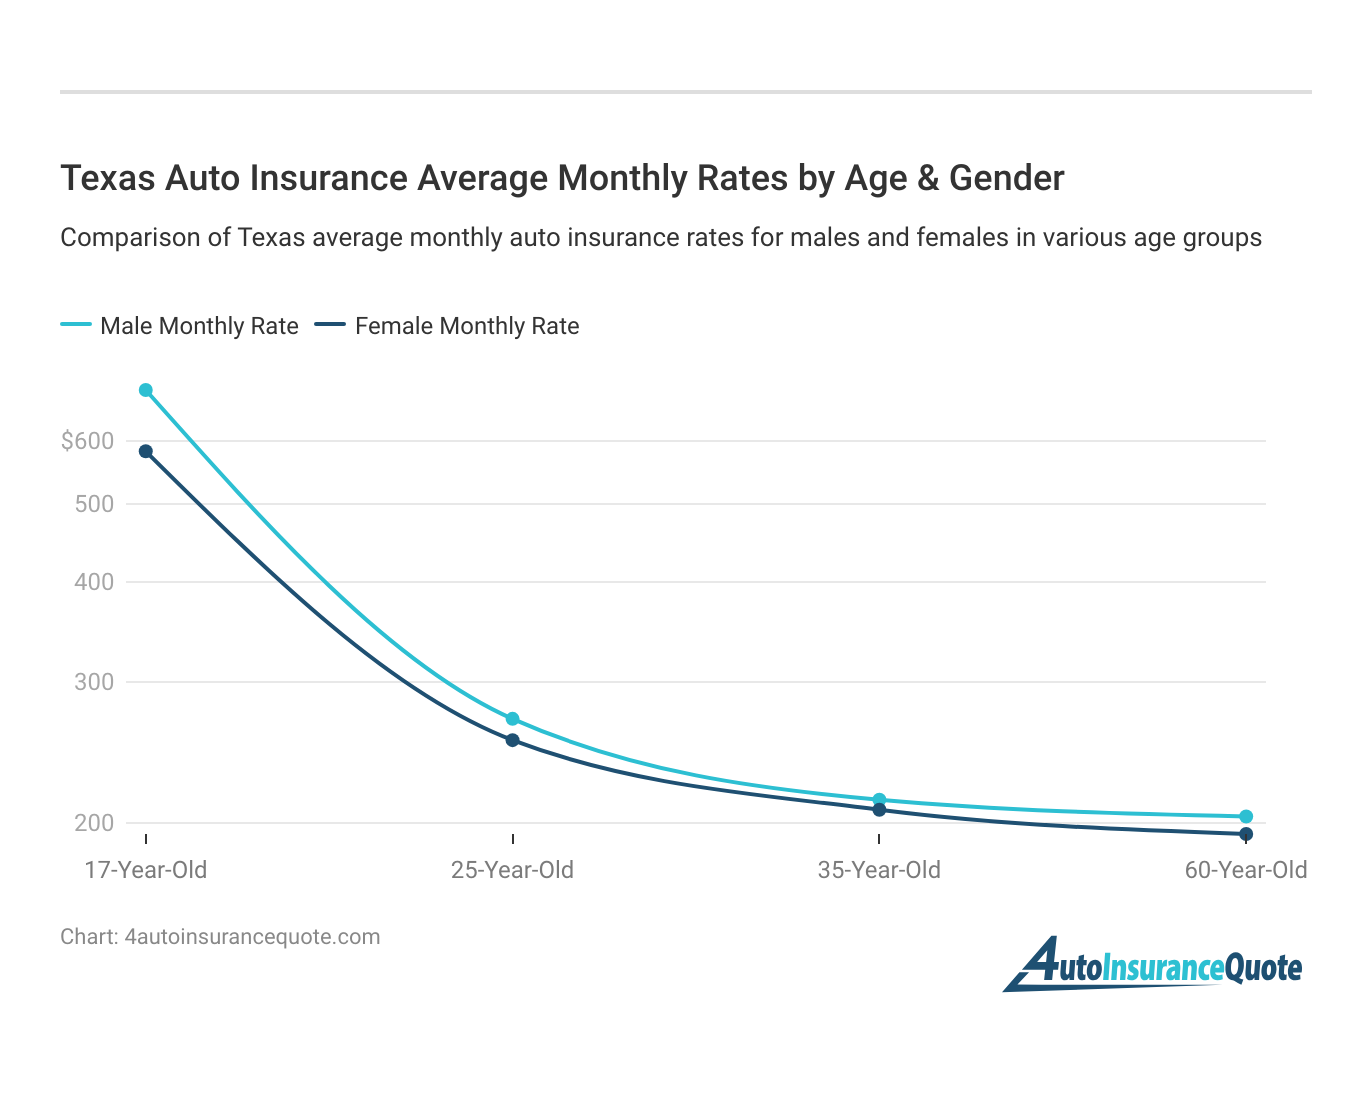 <h3>Texas Auto Insurance Average Monthly Rates by Age & Gender</h3>